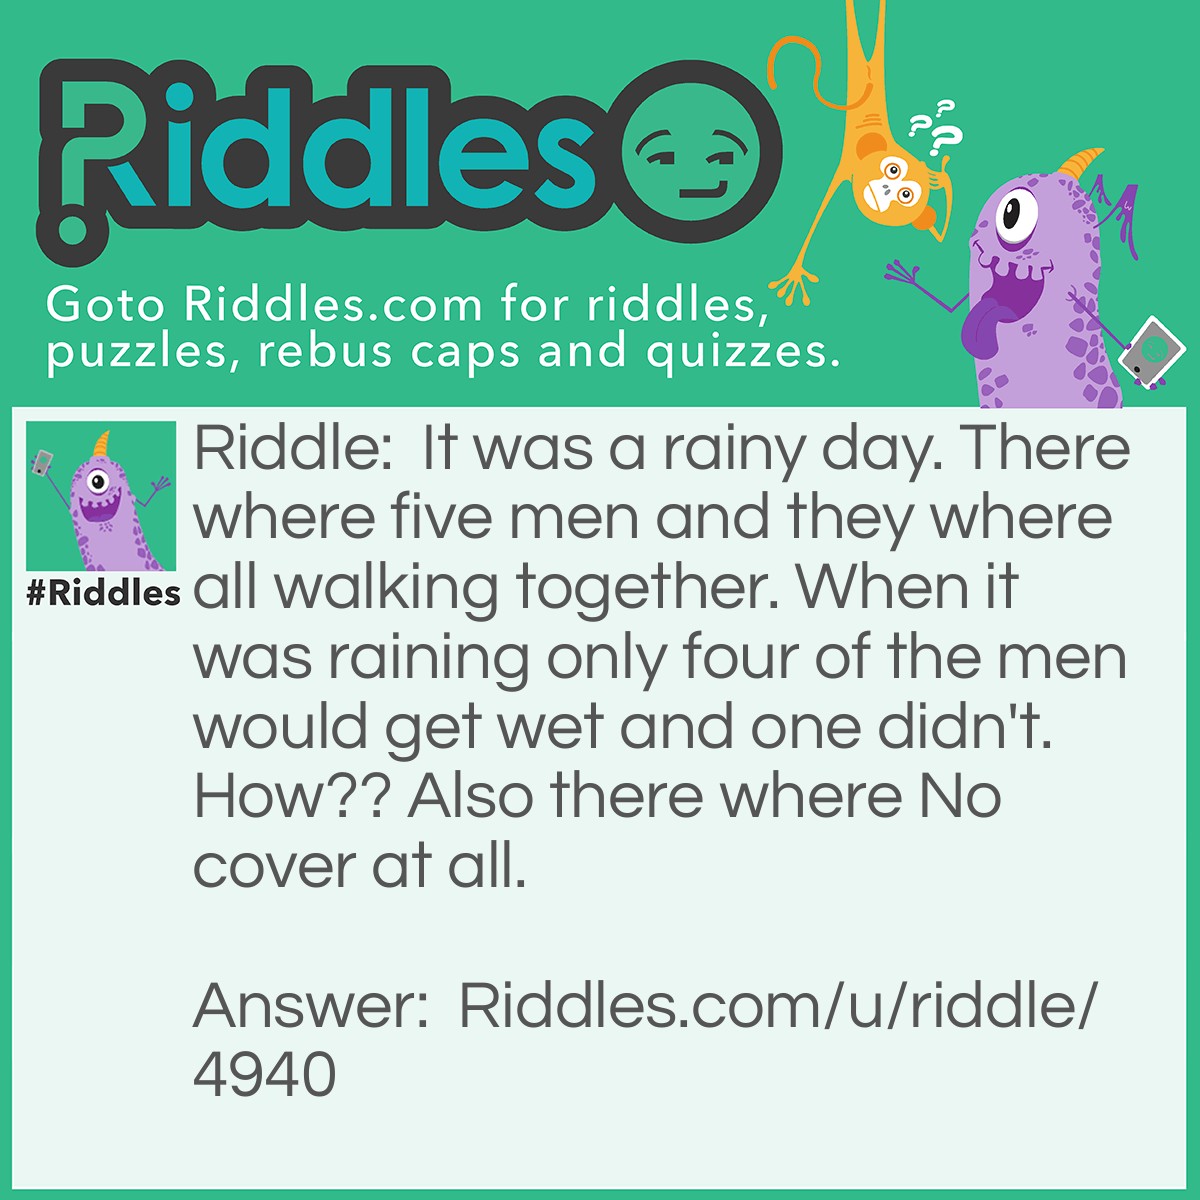 Riddle: It was a rainy day. There where five men and they where all walking together. When it was raining only four of the men would get wet and one didn't. How?? Also there where No cover at all. Answer: Well, the four men was carrying a dead man in a coffin. So when it was raining only one man didn't get wet cause he was in a coffin ready to get buried.